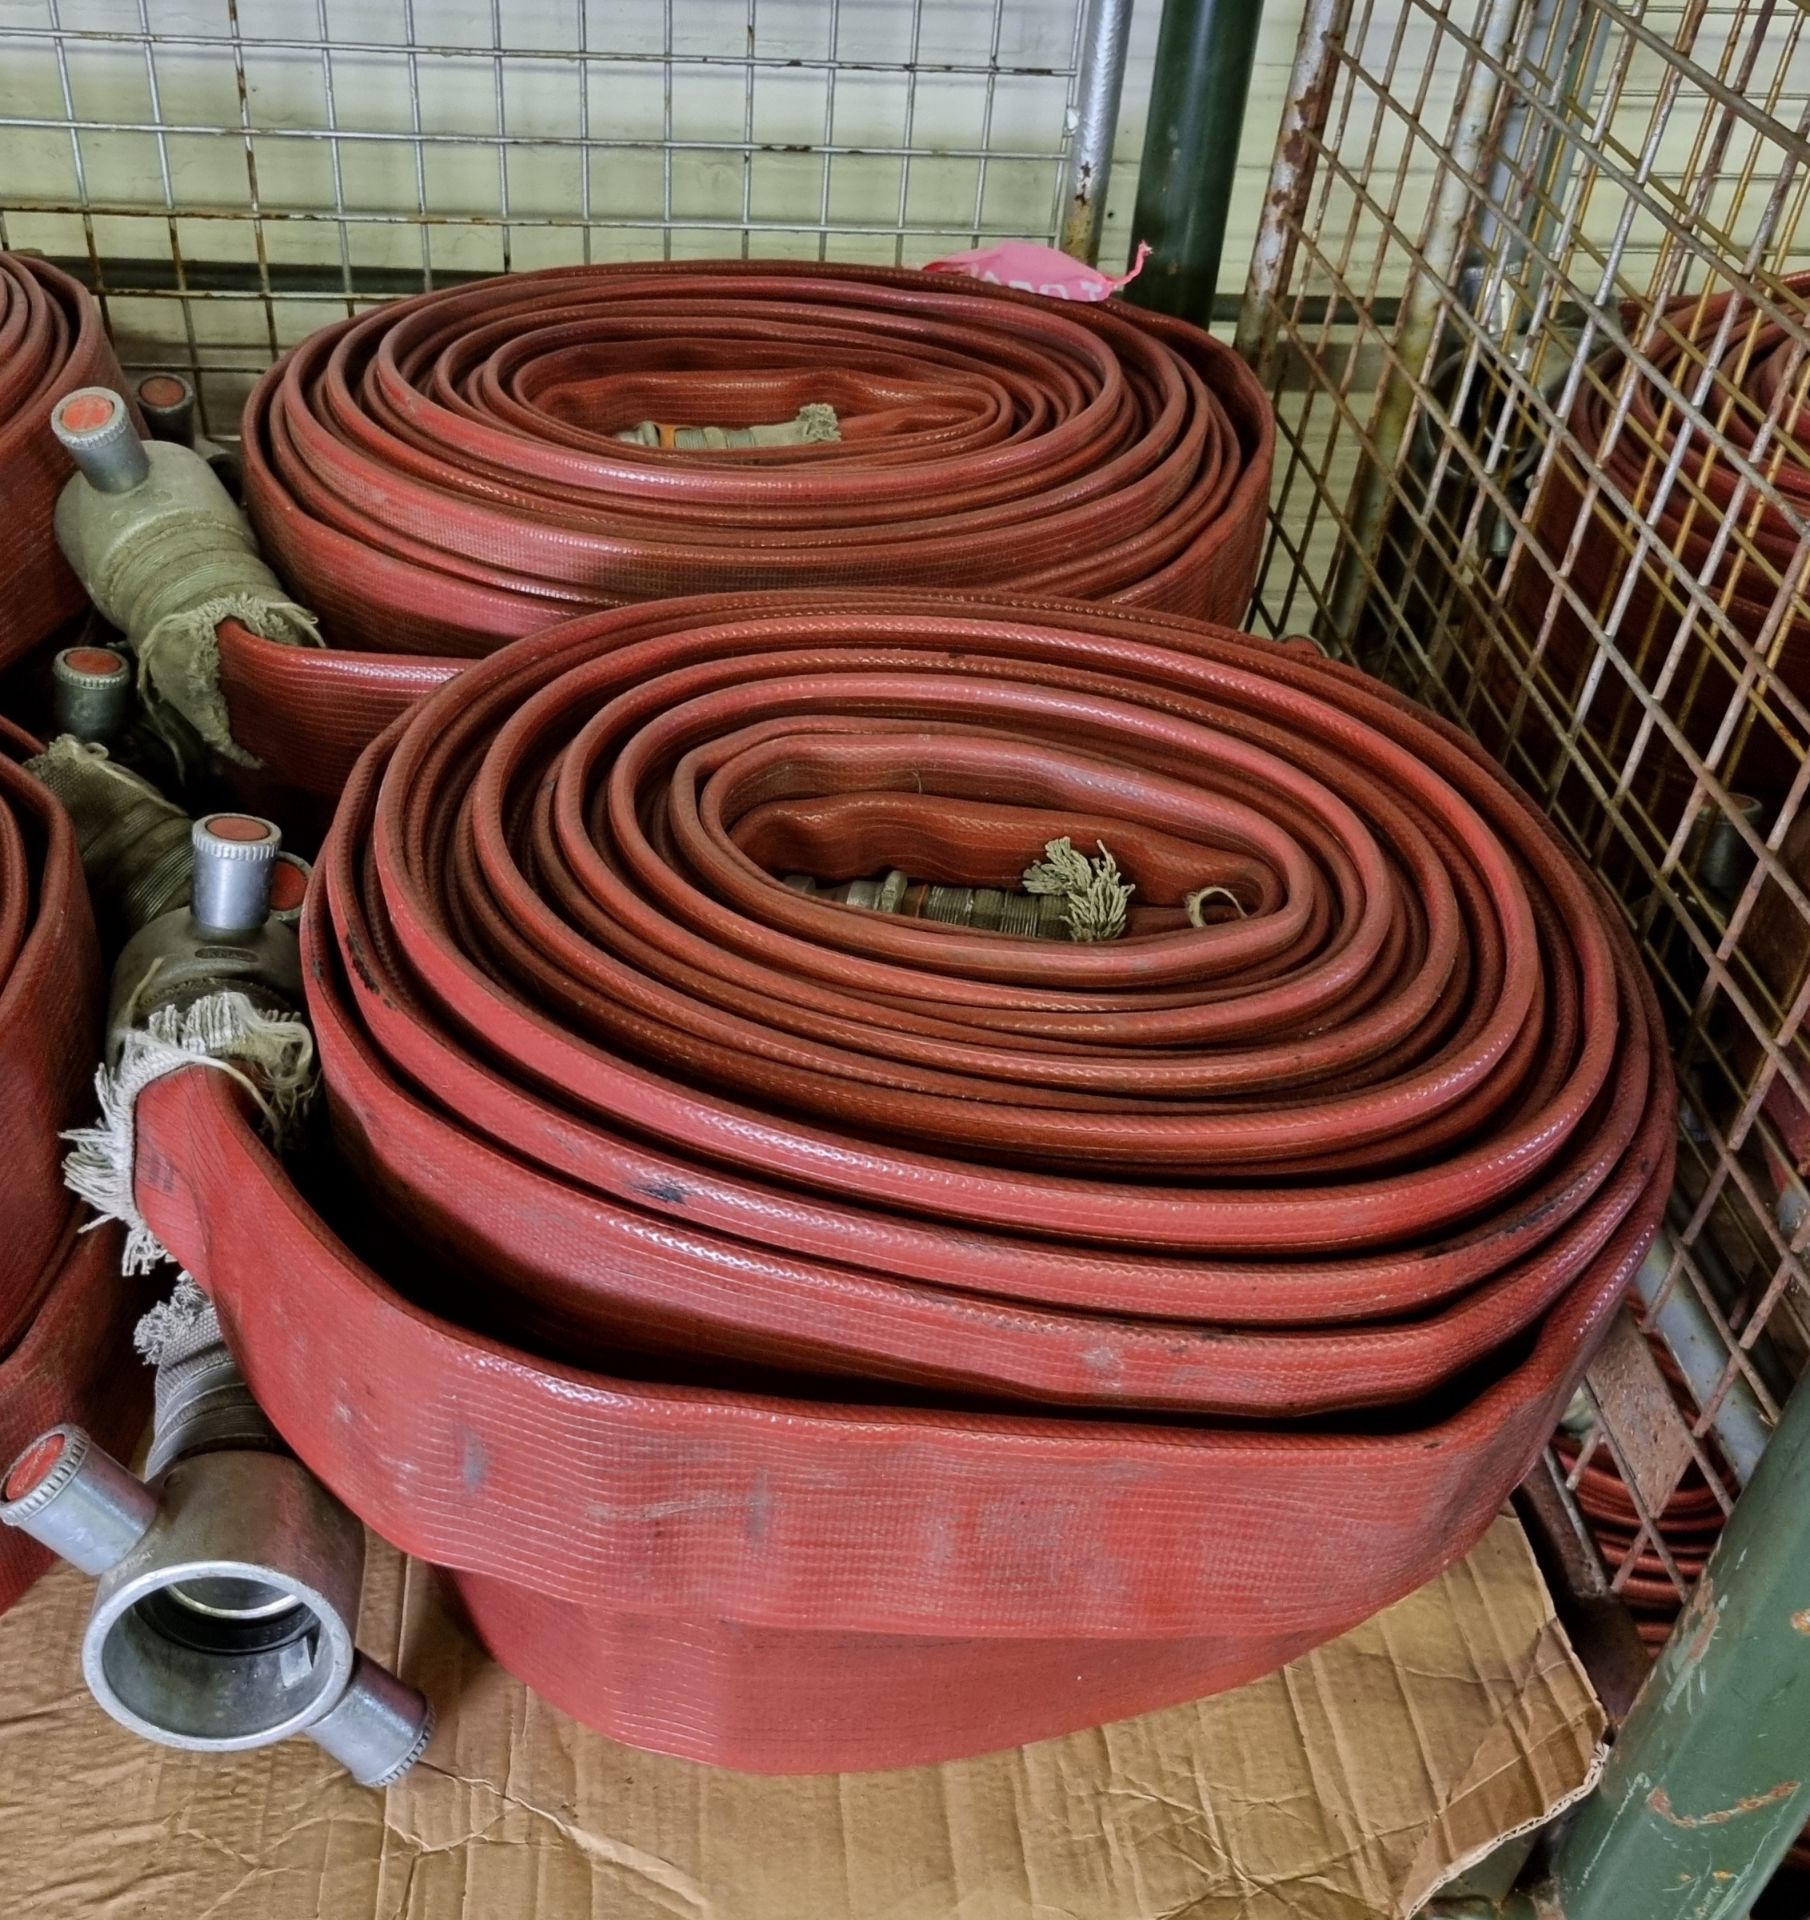 8x Angus Duraline 70mm lay flat hoses with couplings - approx 23 M in length - Bild 3 aus 5